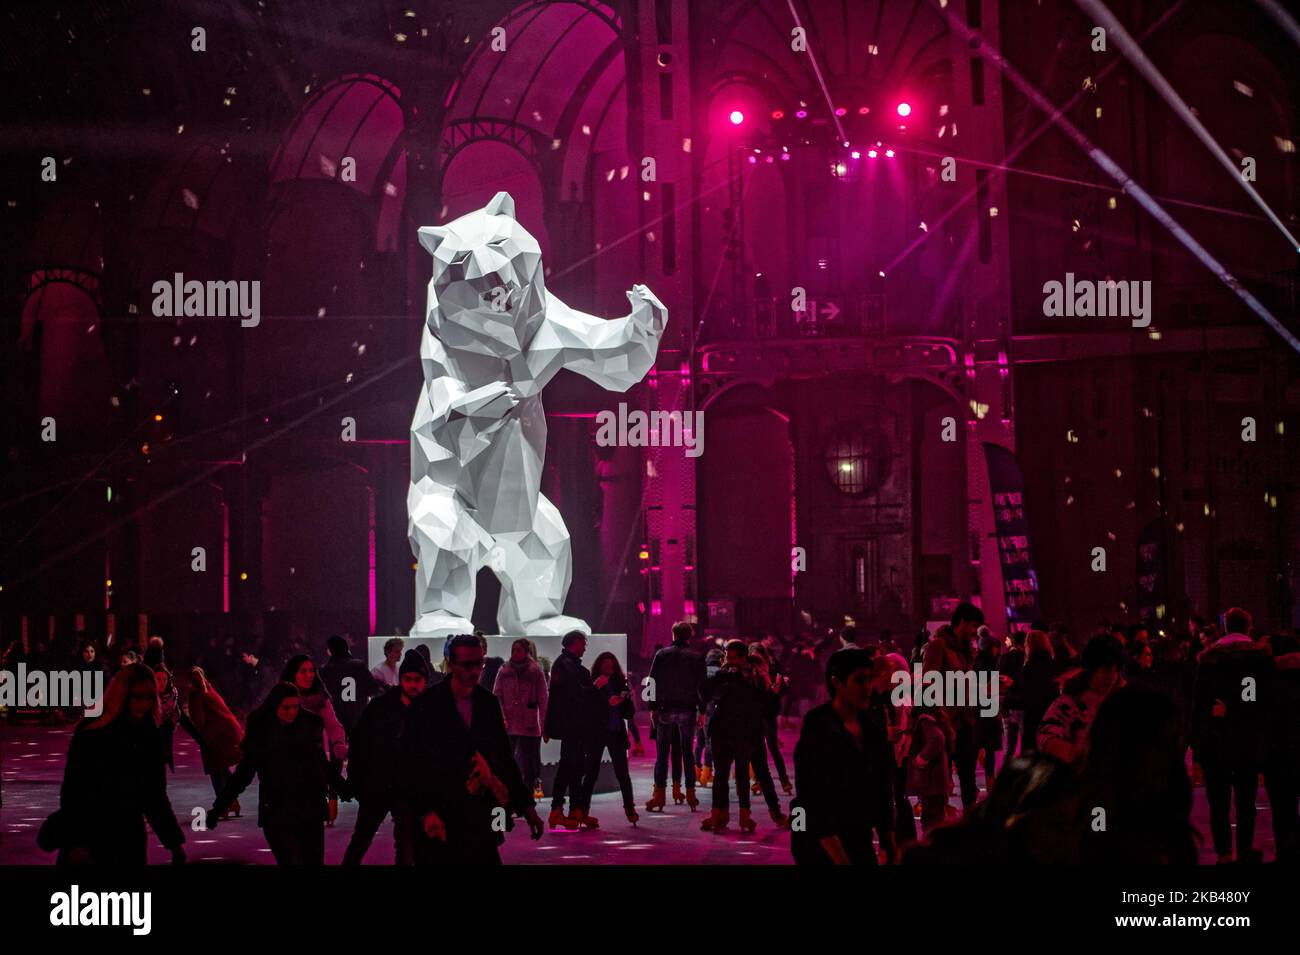 The ice skating rink open to the public during the Christmas holydays hosted under the glass dome of Grand Palais in Paris during the evenings of the end of the year to celebrate holydays and new year. Ligth show , Music with DJ set, and 'Ours' of Richard Orlinski enjoy the people which skating - December 20, 2018 - Paris (Photo by Daniel Pier/NurPhoto)  Stock Photo